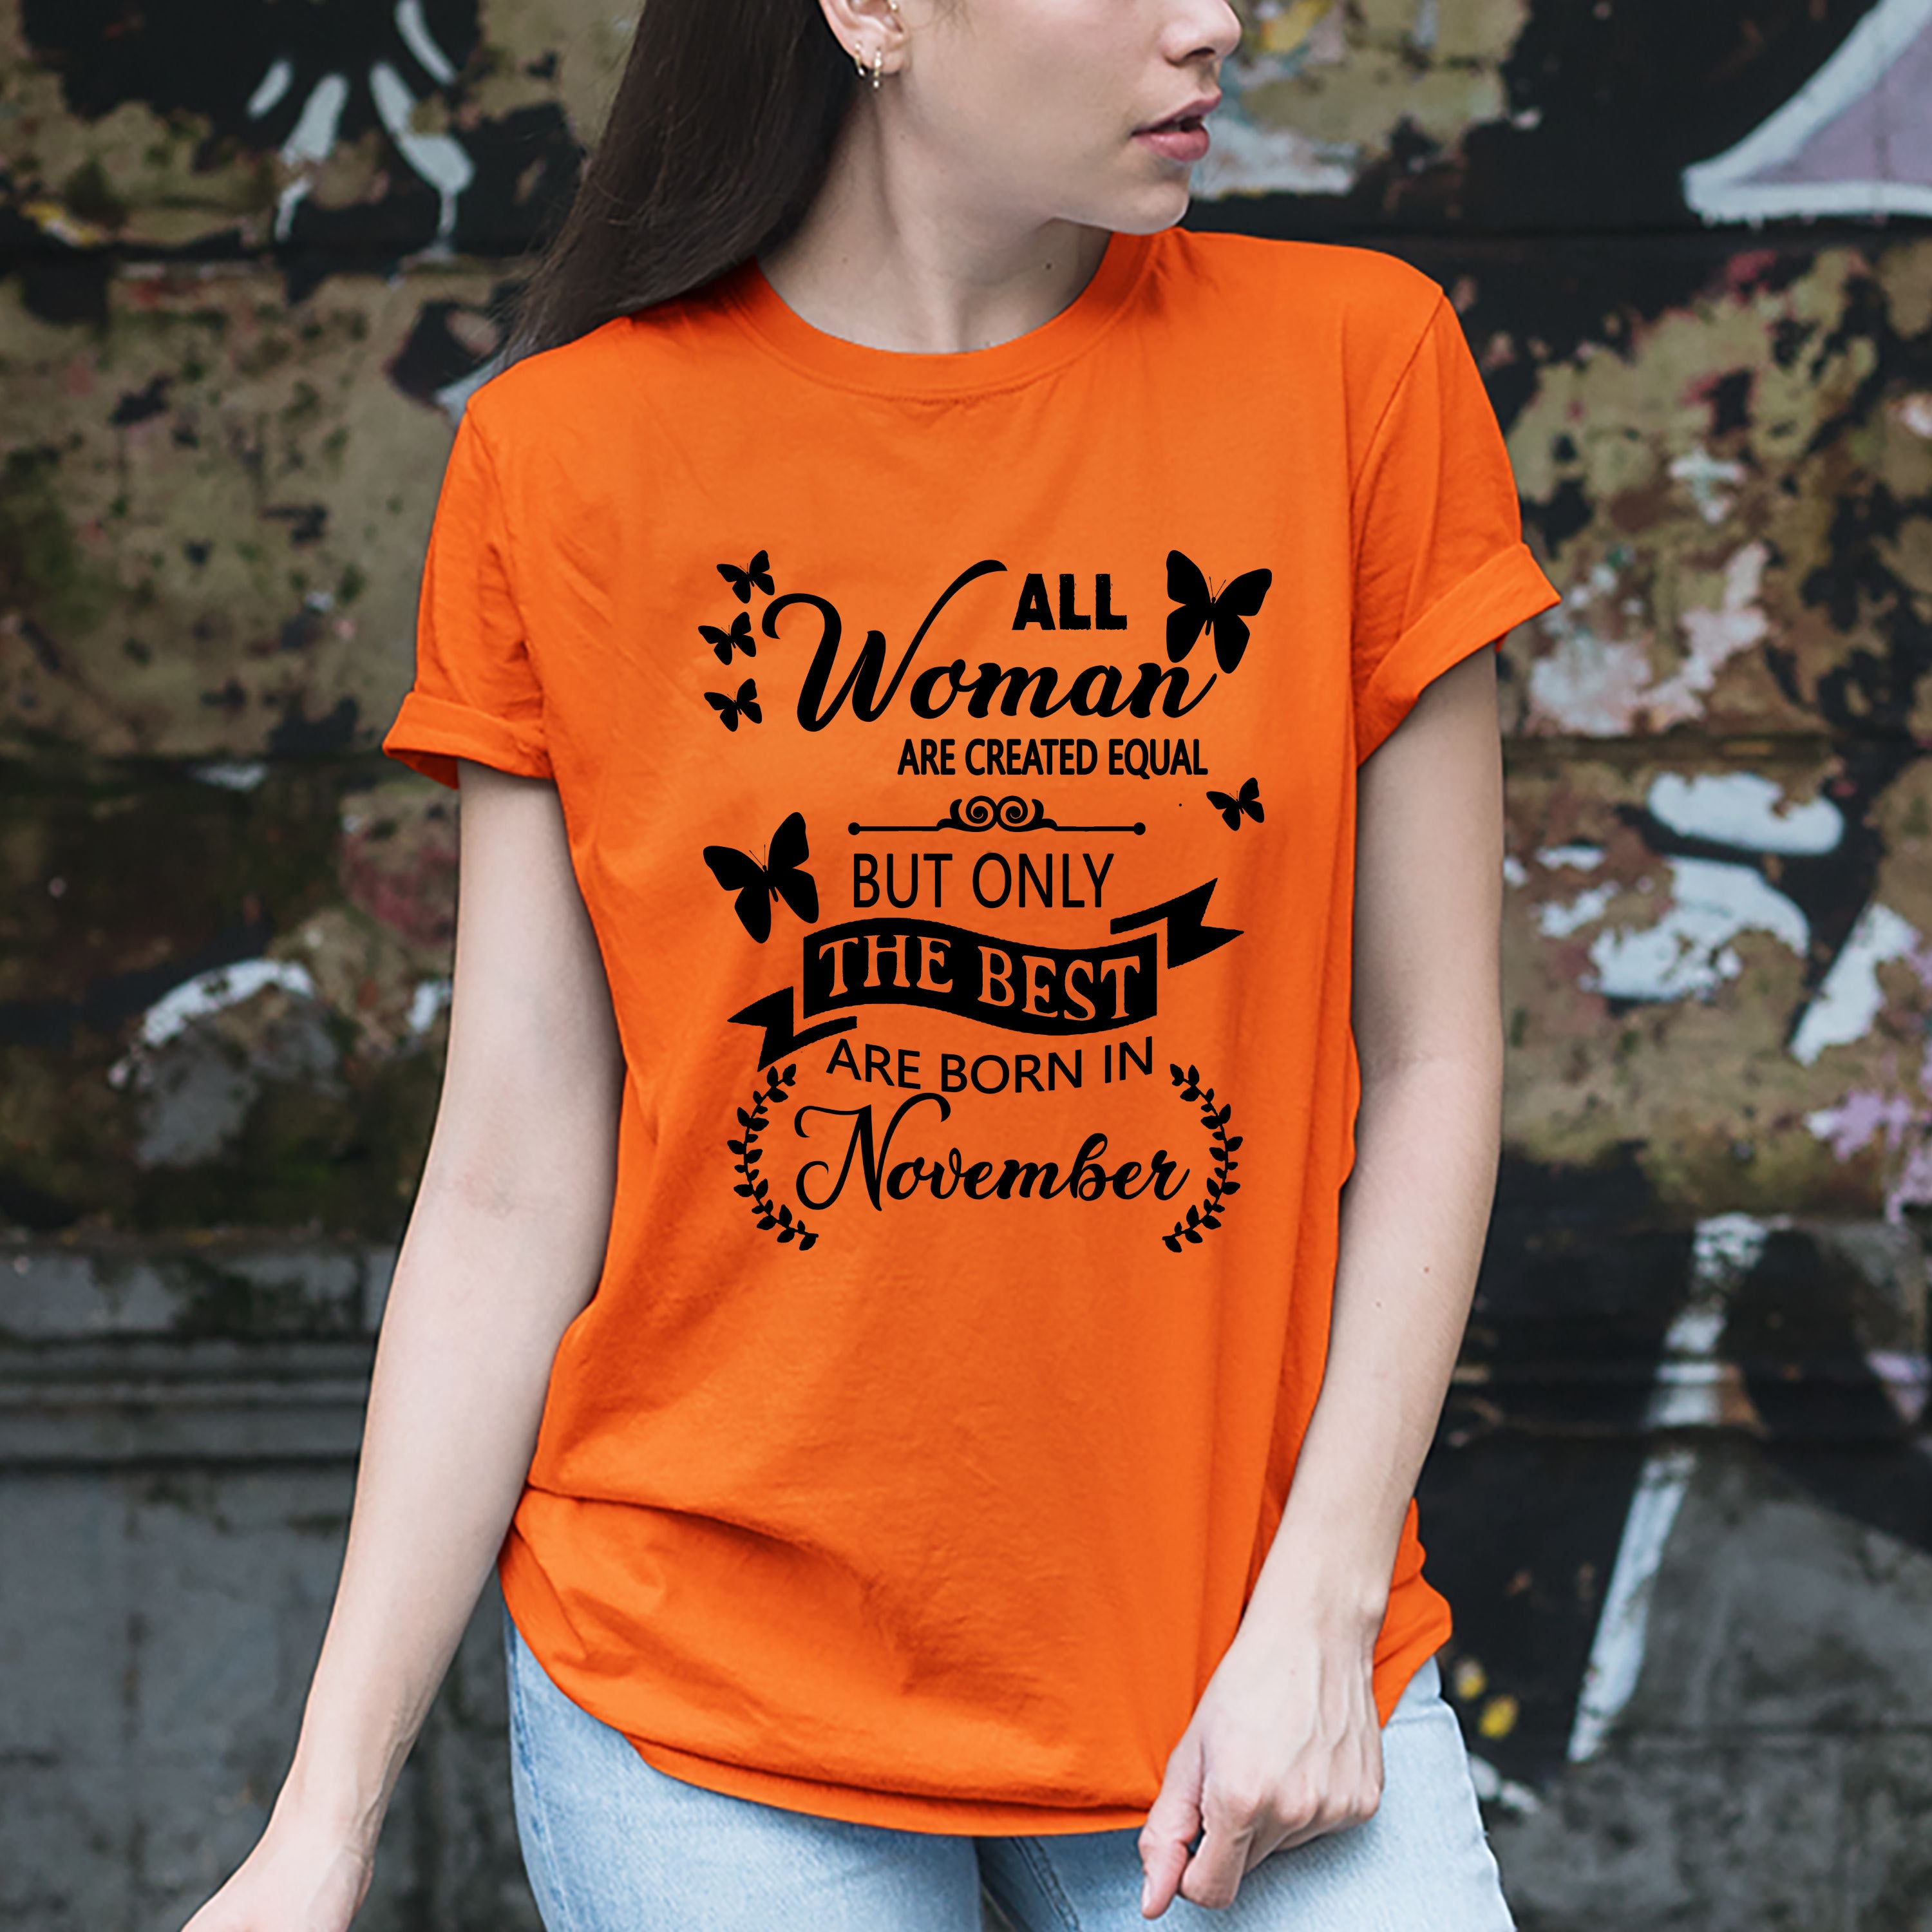 "All Woman Are Created Equal But The Best Are Born in November".